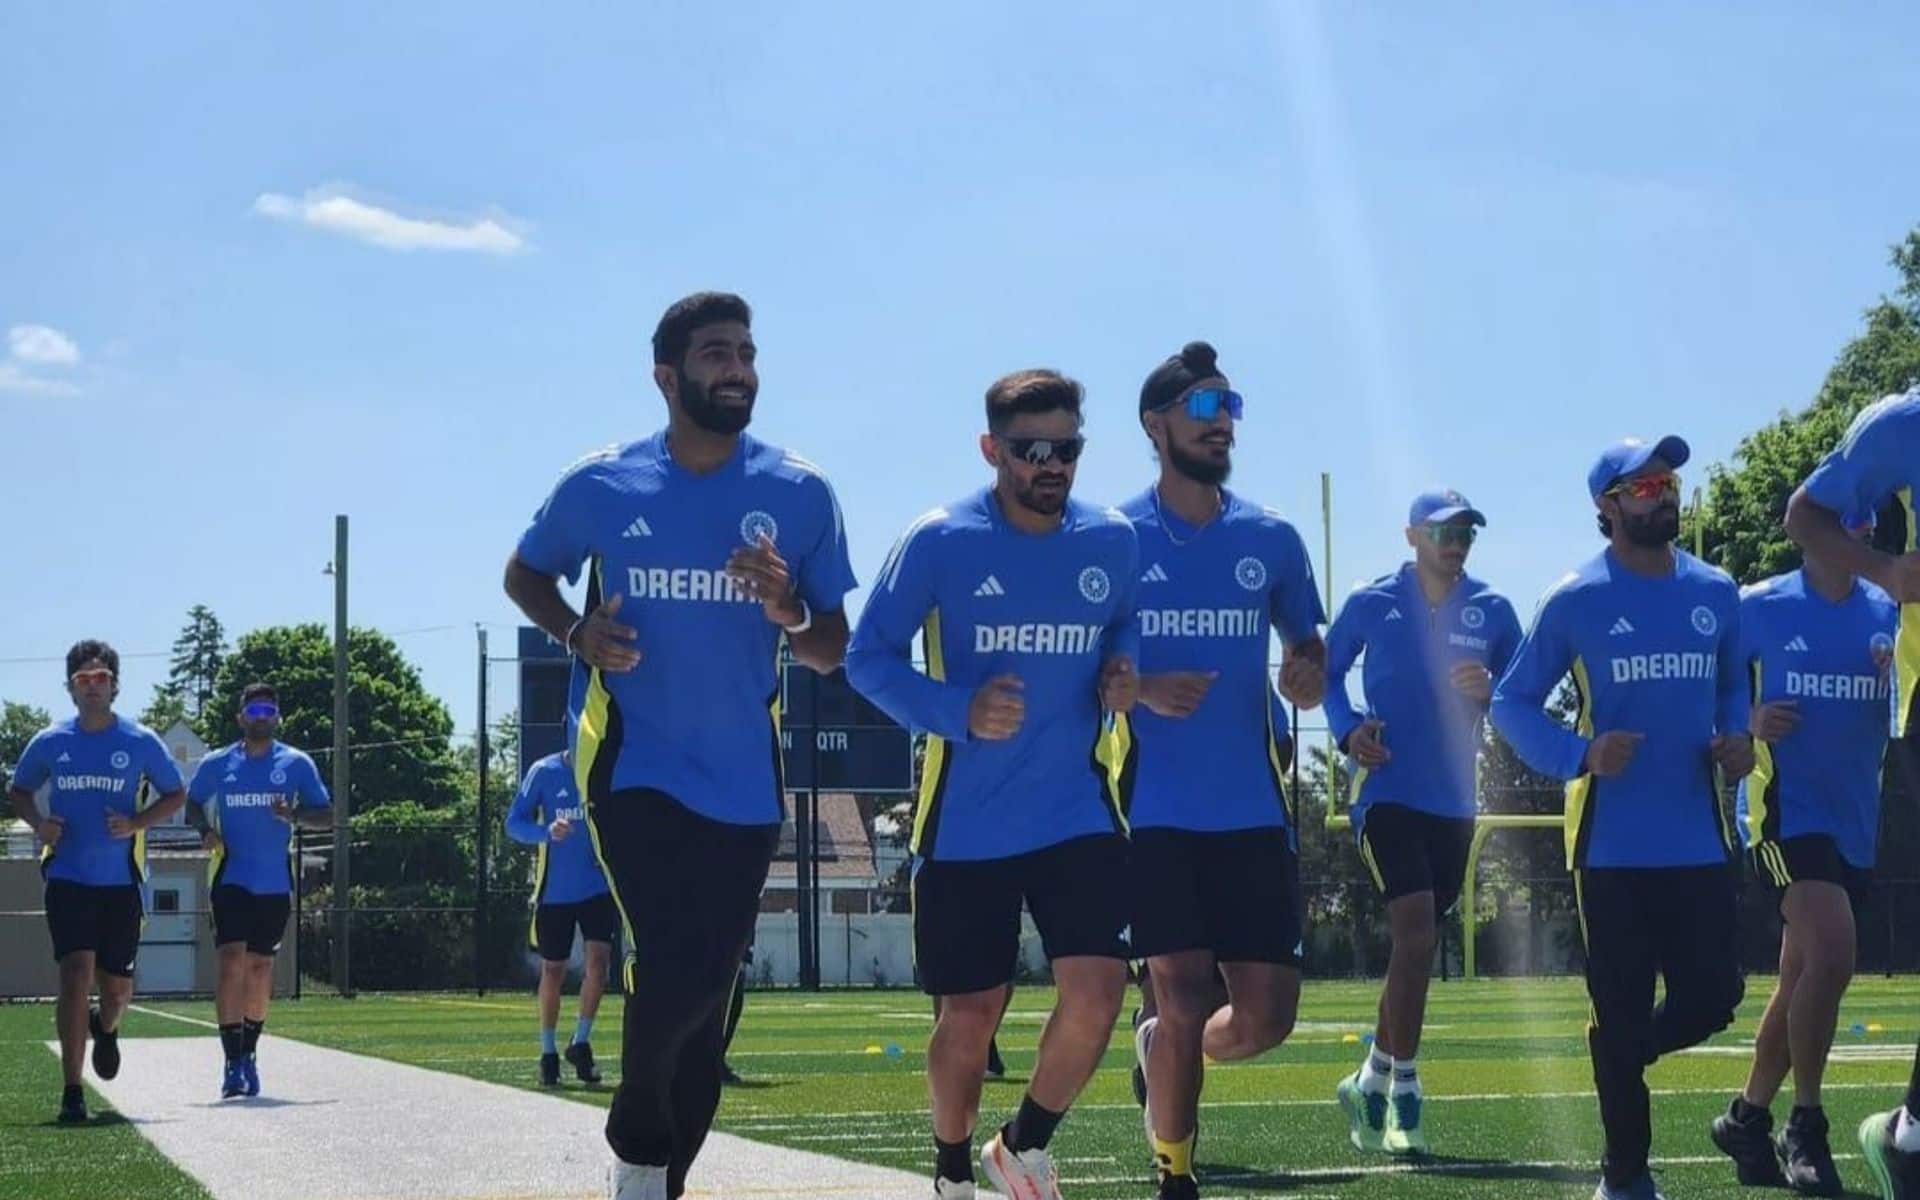 Jasprit Bumrah's Practice Pics Stoke T20 World Cup Frenzy in USA [Instagram]